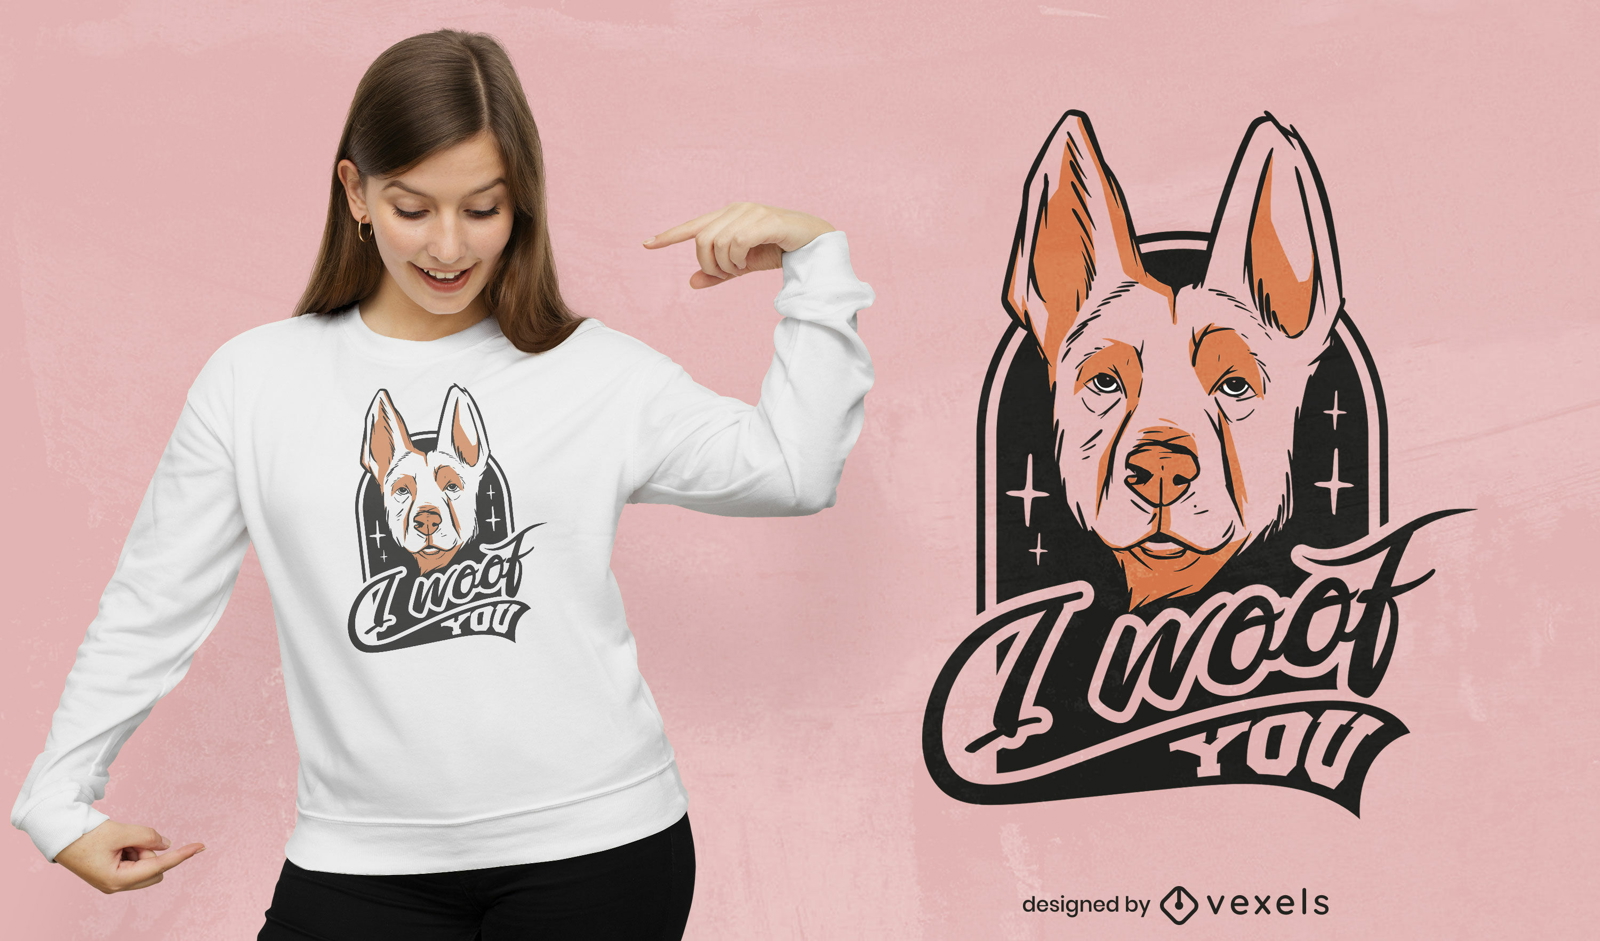 Dog with big ears cute quote t-shirt design